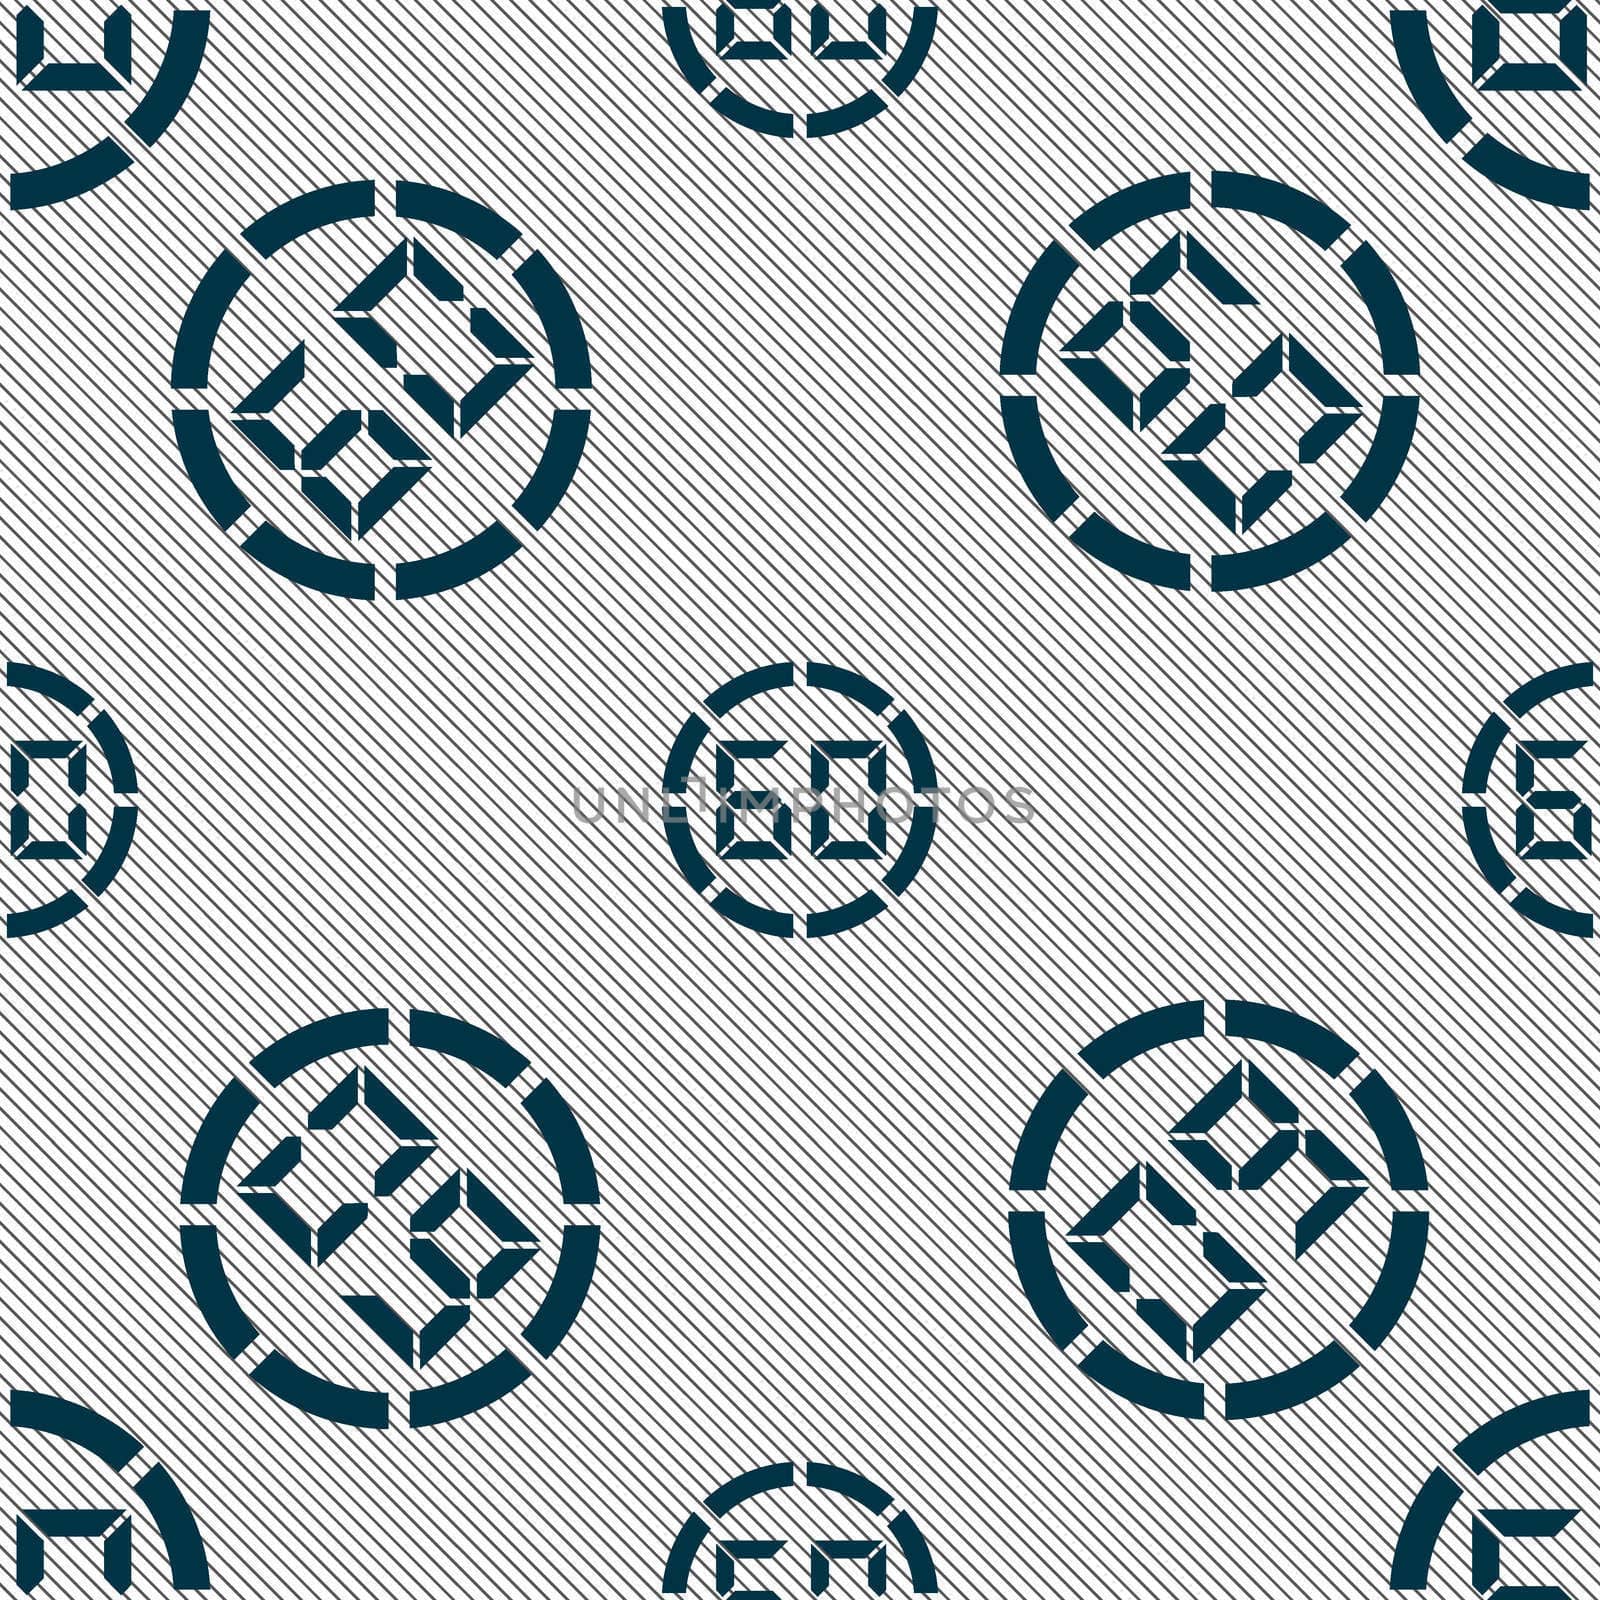 60 second stopwatch icon sign. Seamless pattern with geometric texture. illustration